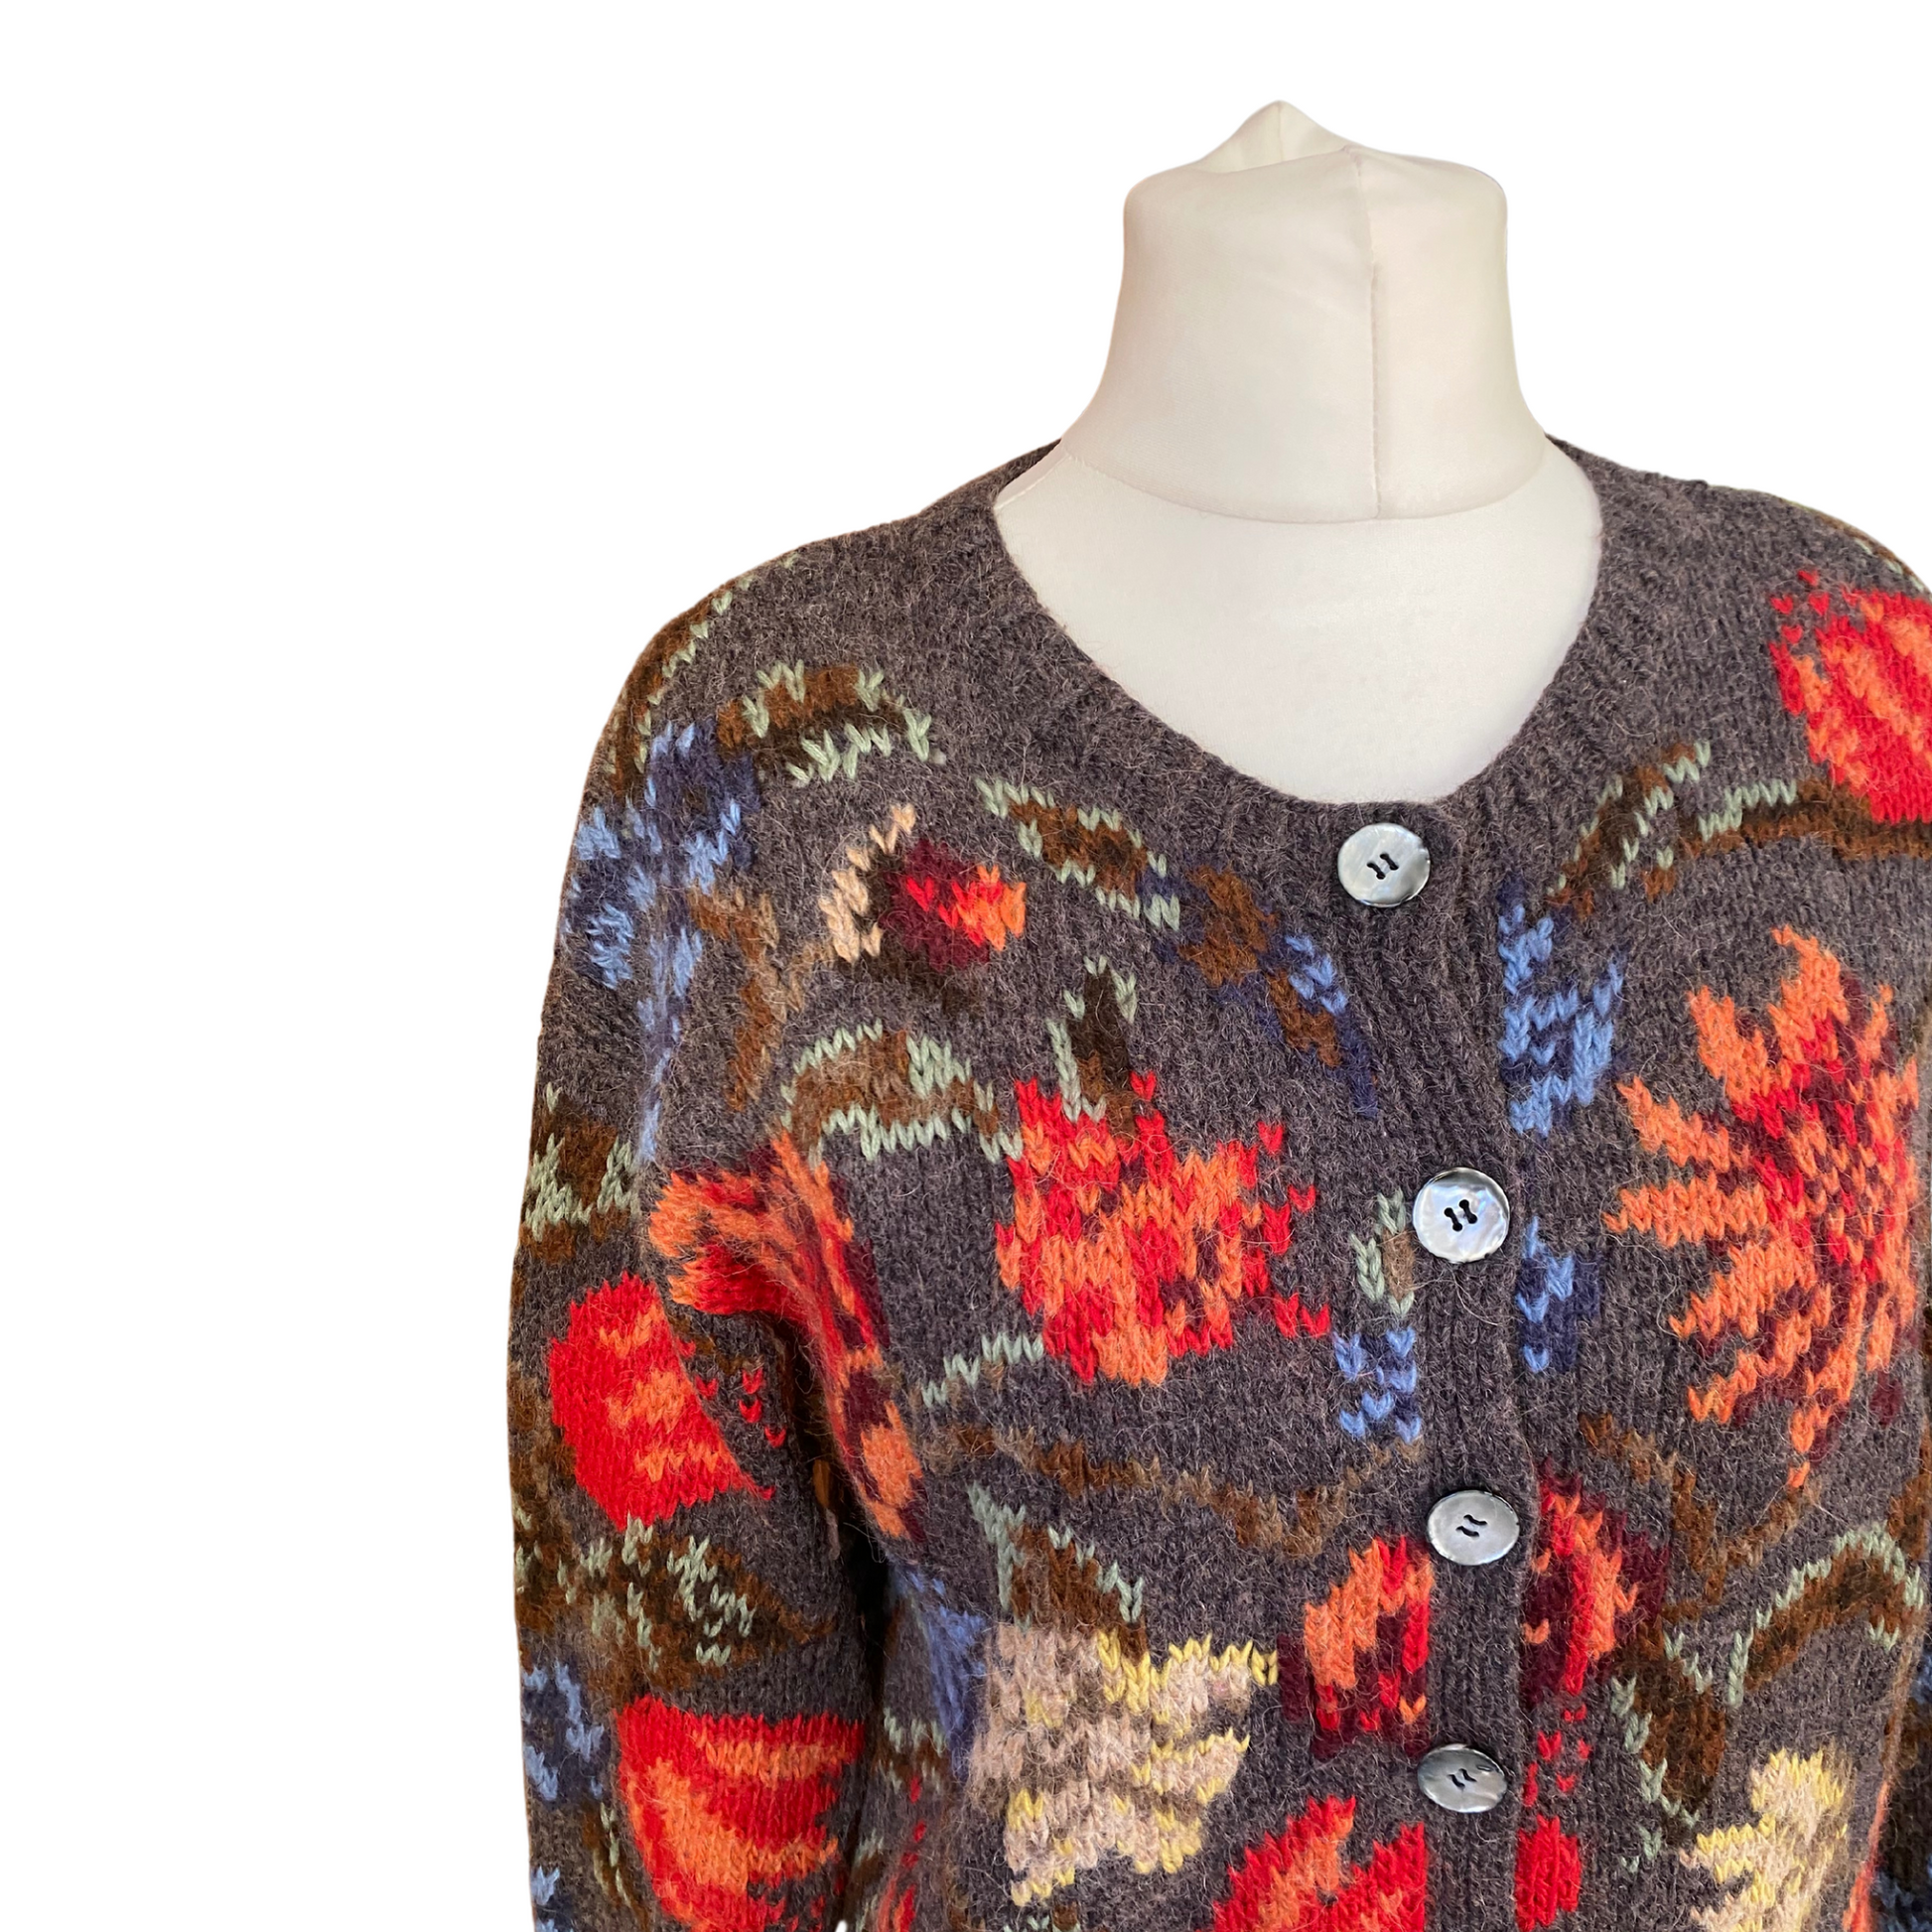 Crew neck design adds a classic touch to this chunky charcoal cardigan with eye-catching floral pattern